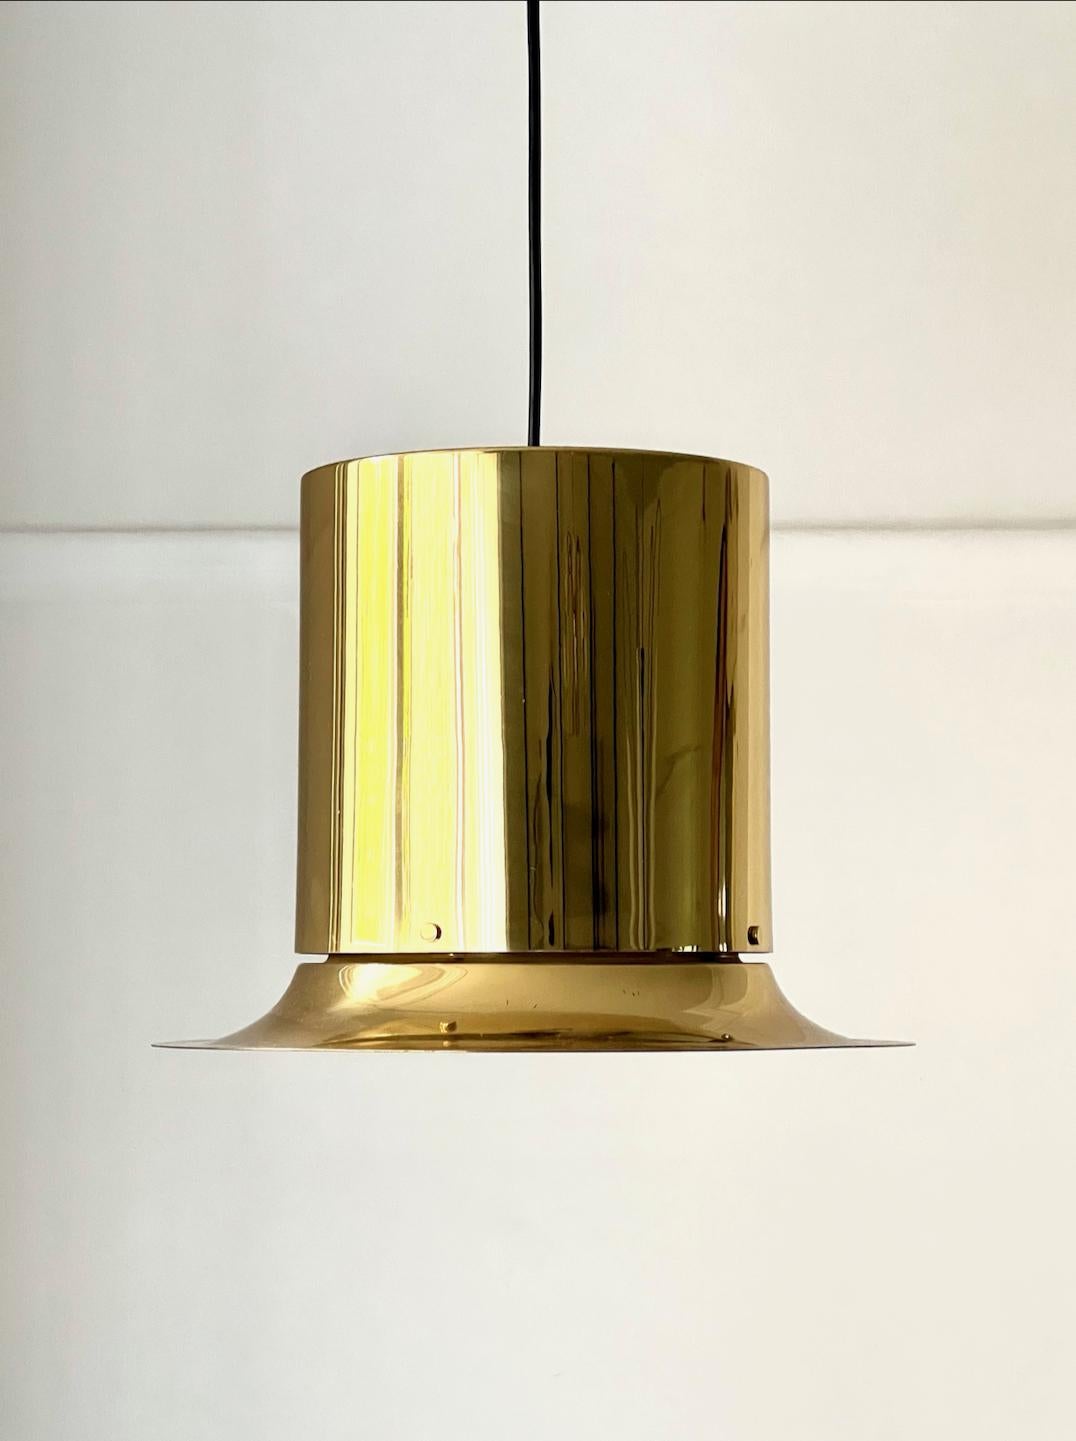 A mid-century brass pendant light in the shape of a top hat by Hans-Agne Jakobsson for his company in Markaryd, Sweden. An unusual and rarely seen piece of Nordic design. Labelled inside.

The brass shade and original brass ceiling canopy are in